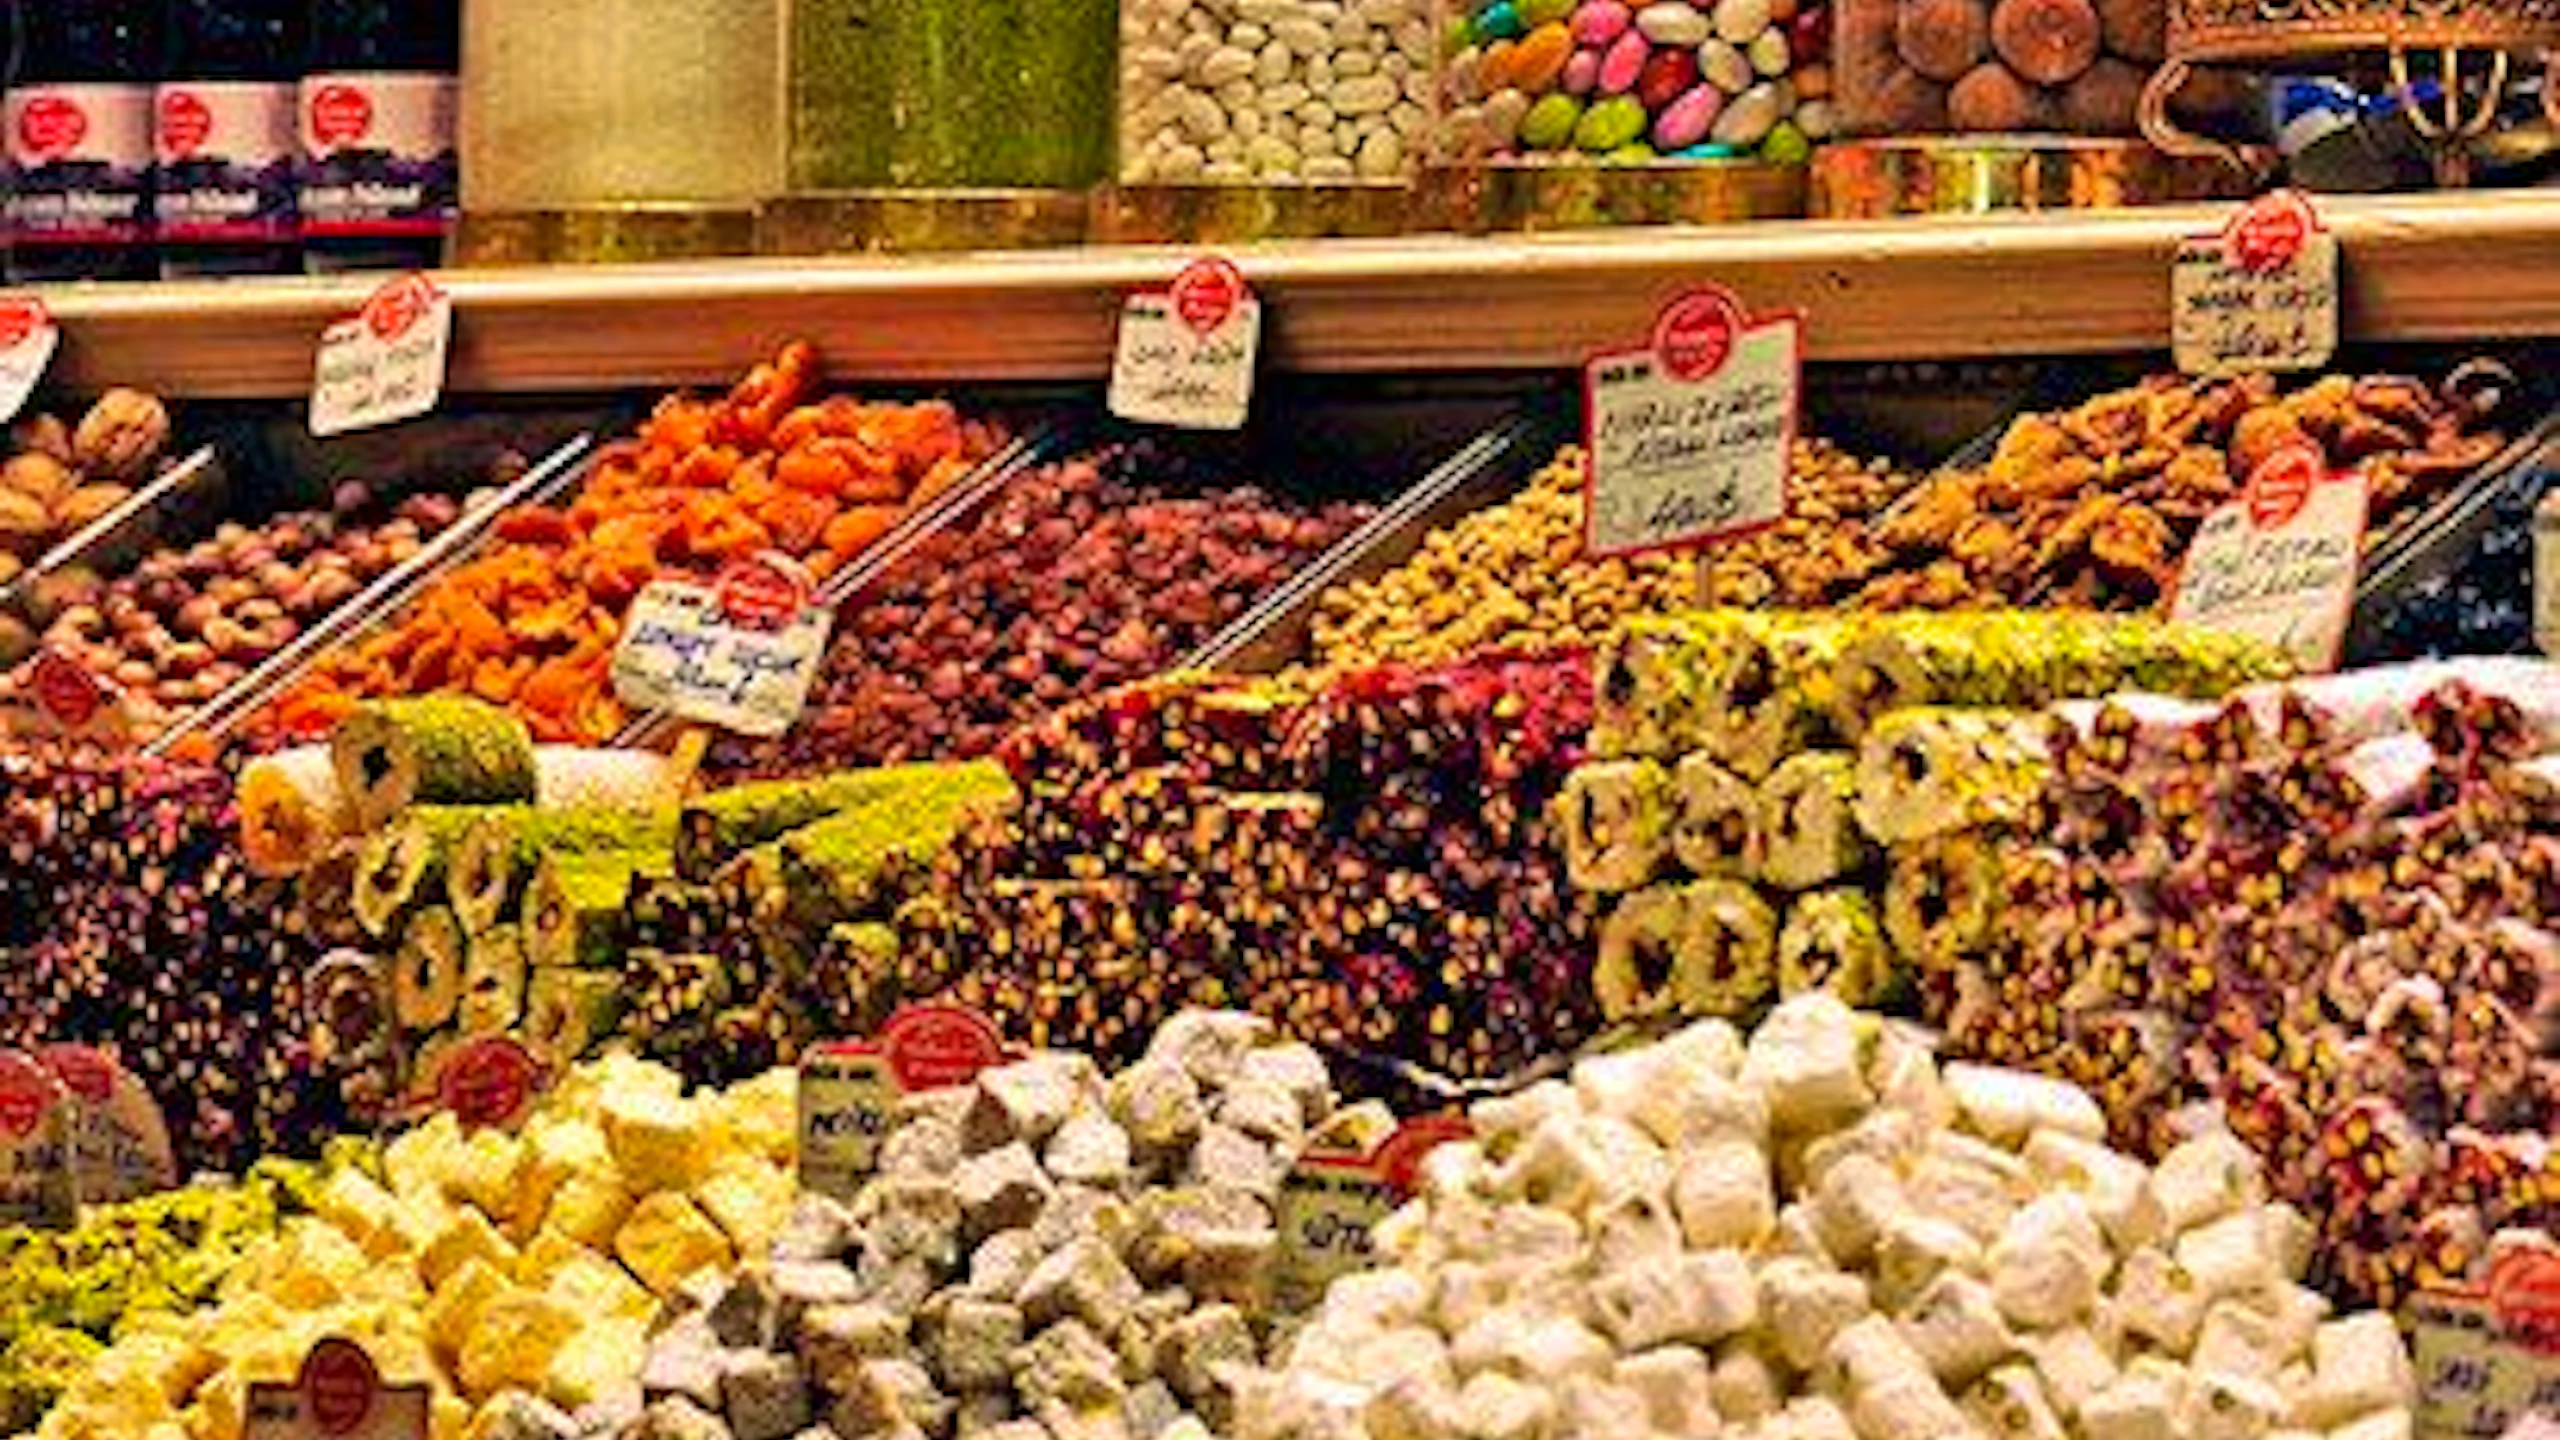 Istanbul Food and Culture Tour: Taste of 2 Continents Price